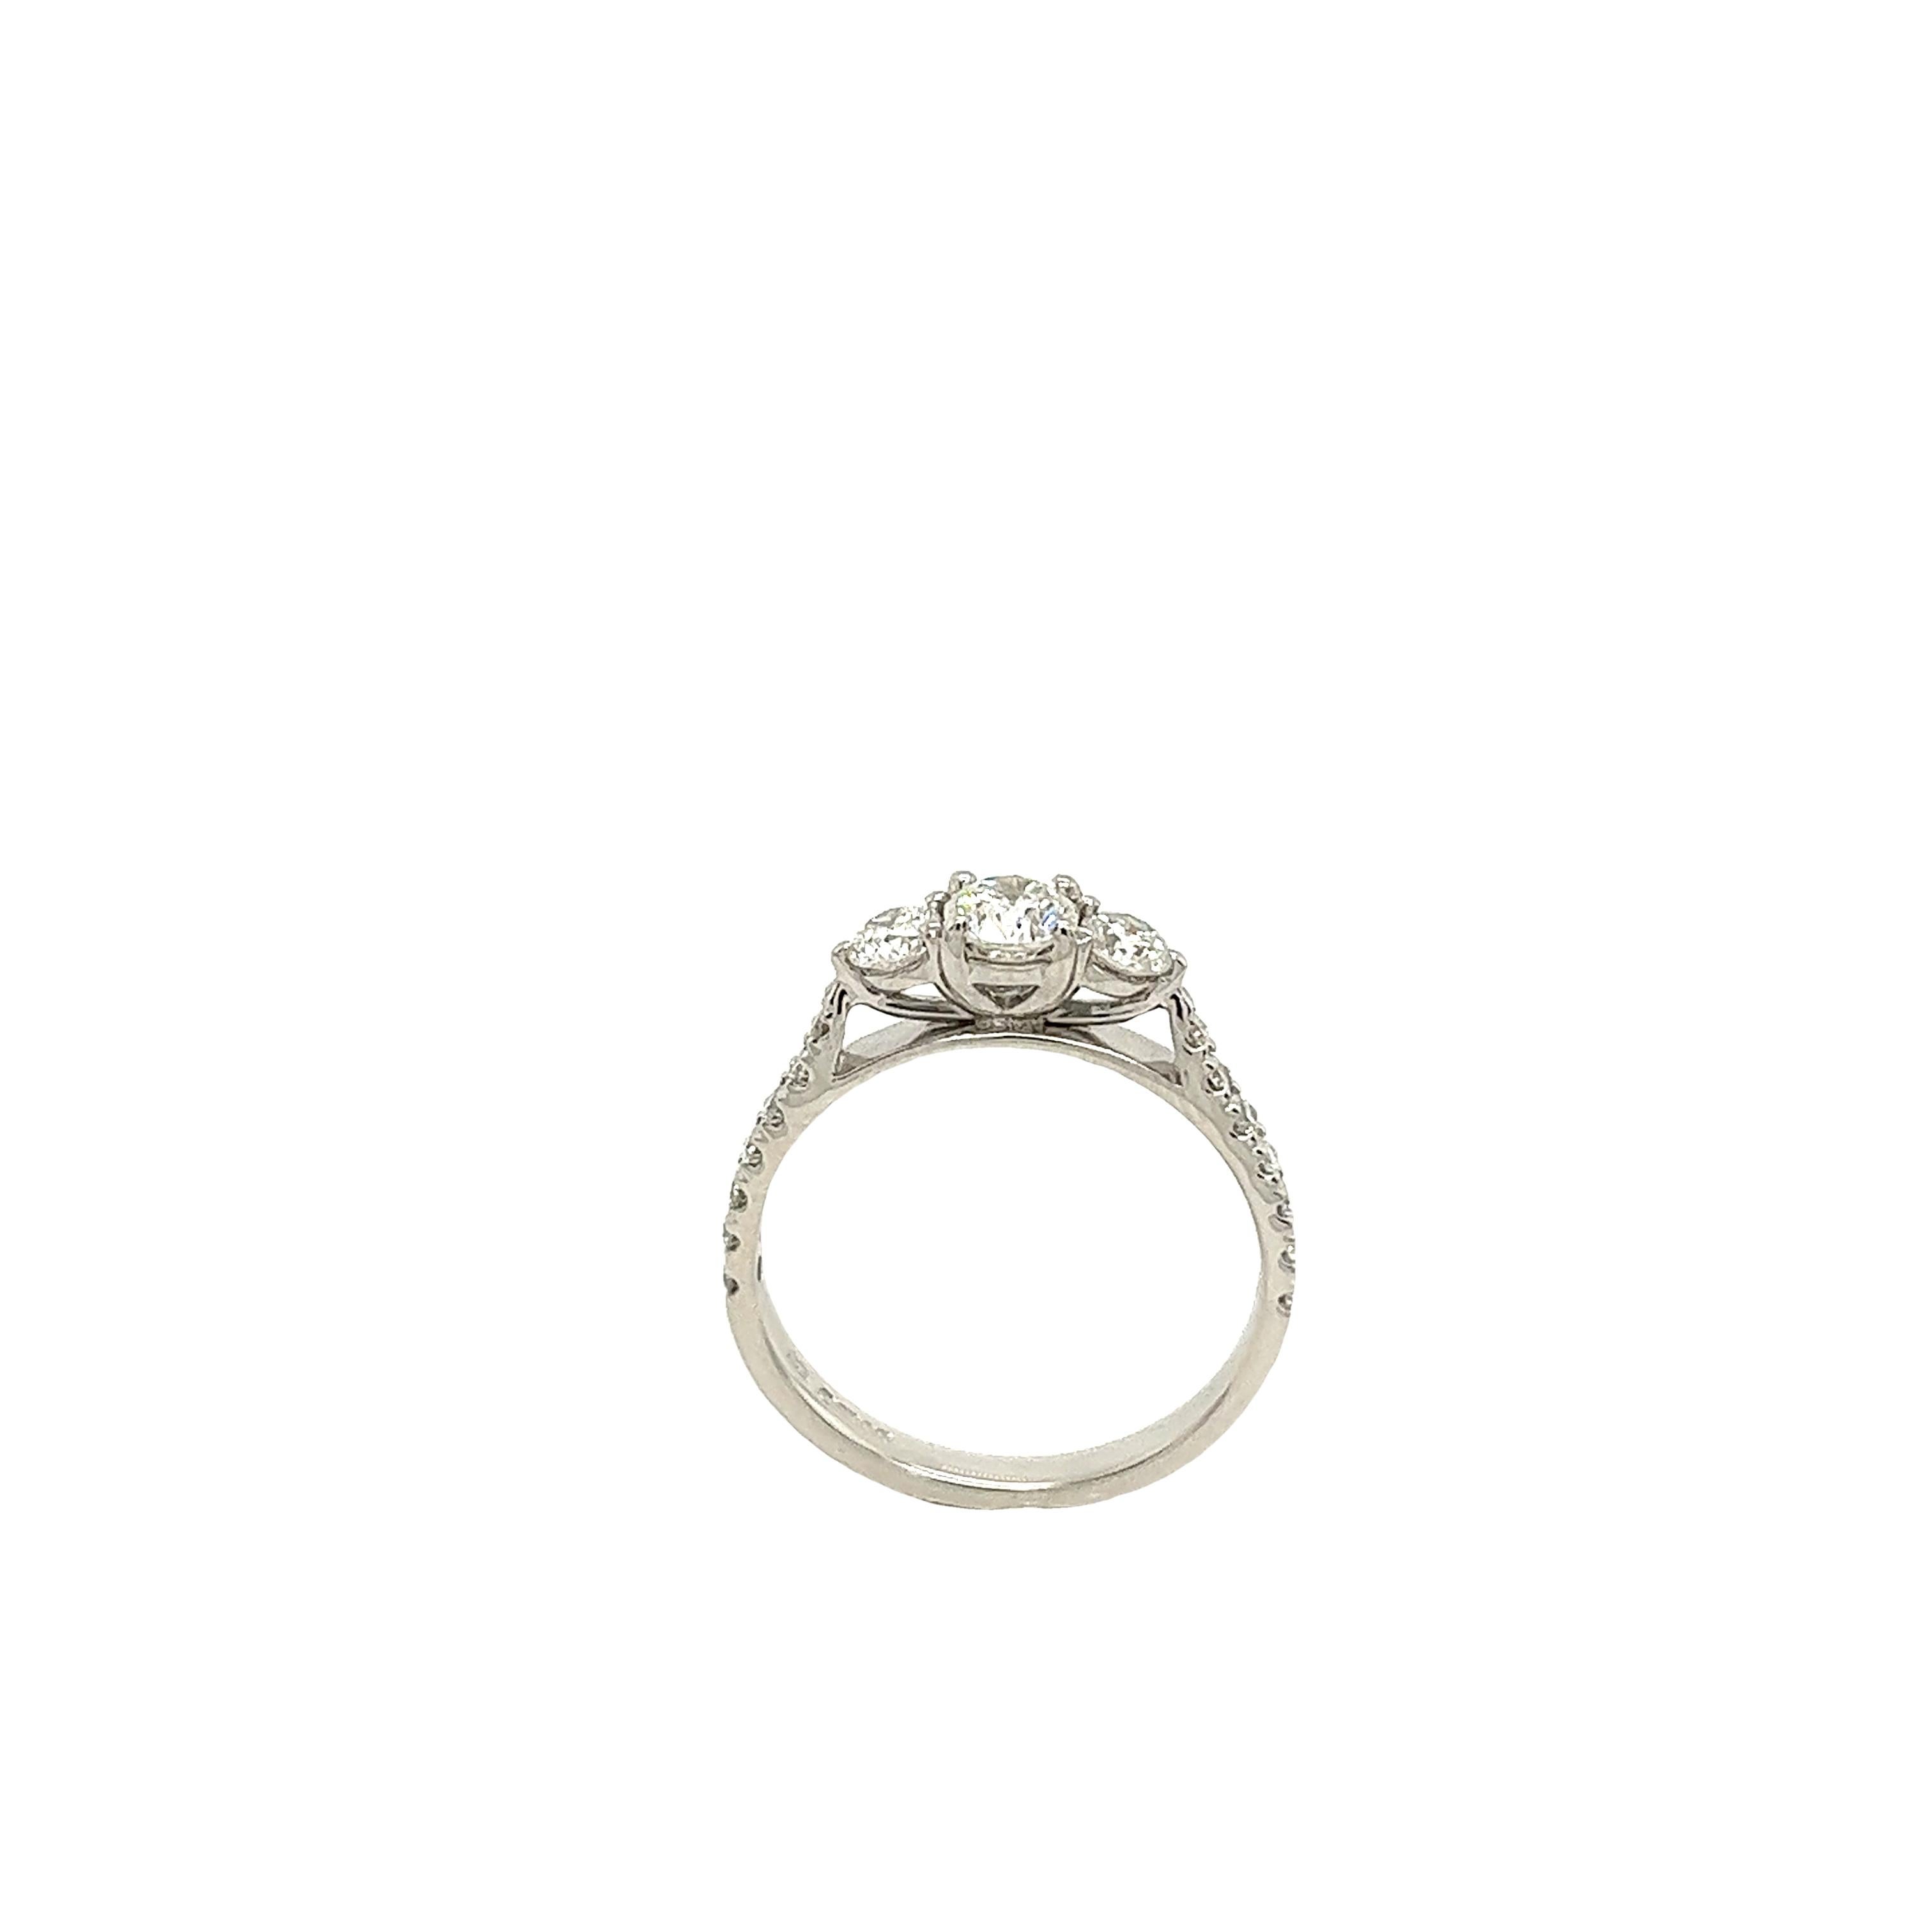 Round Cut 18ct White Gold 3 Stone Diamond Ring Set With 0.70carats of Diamonds For Sale